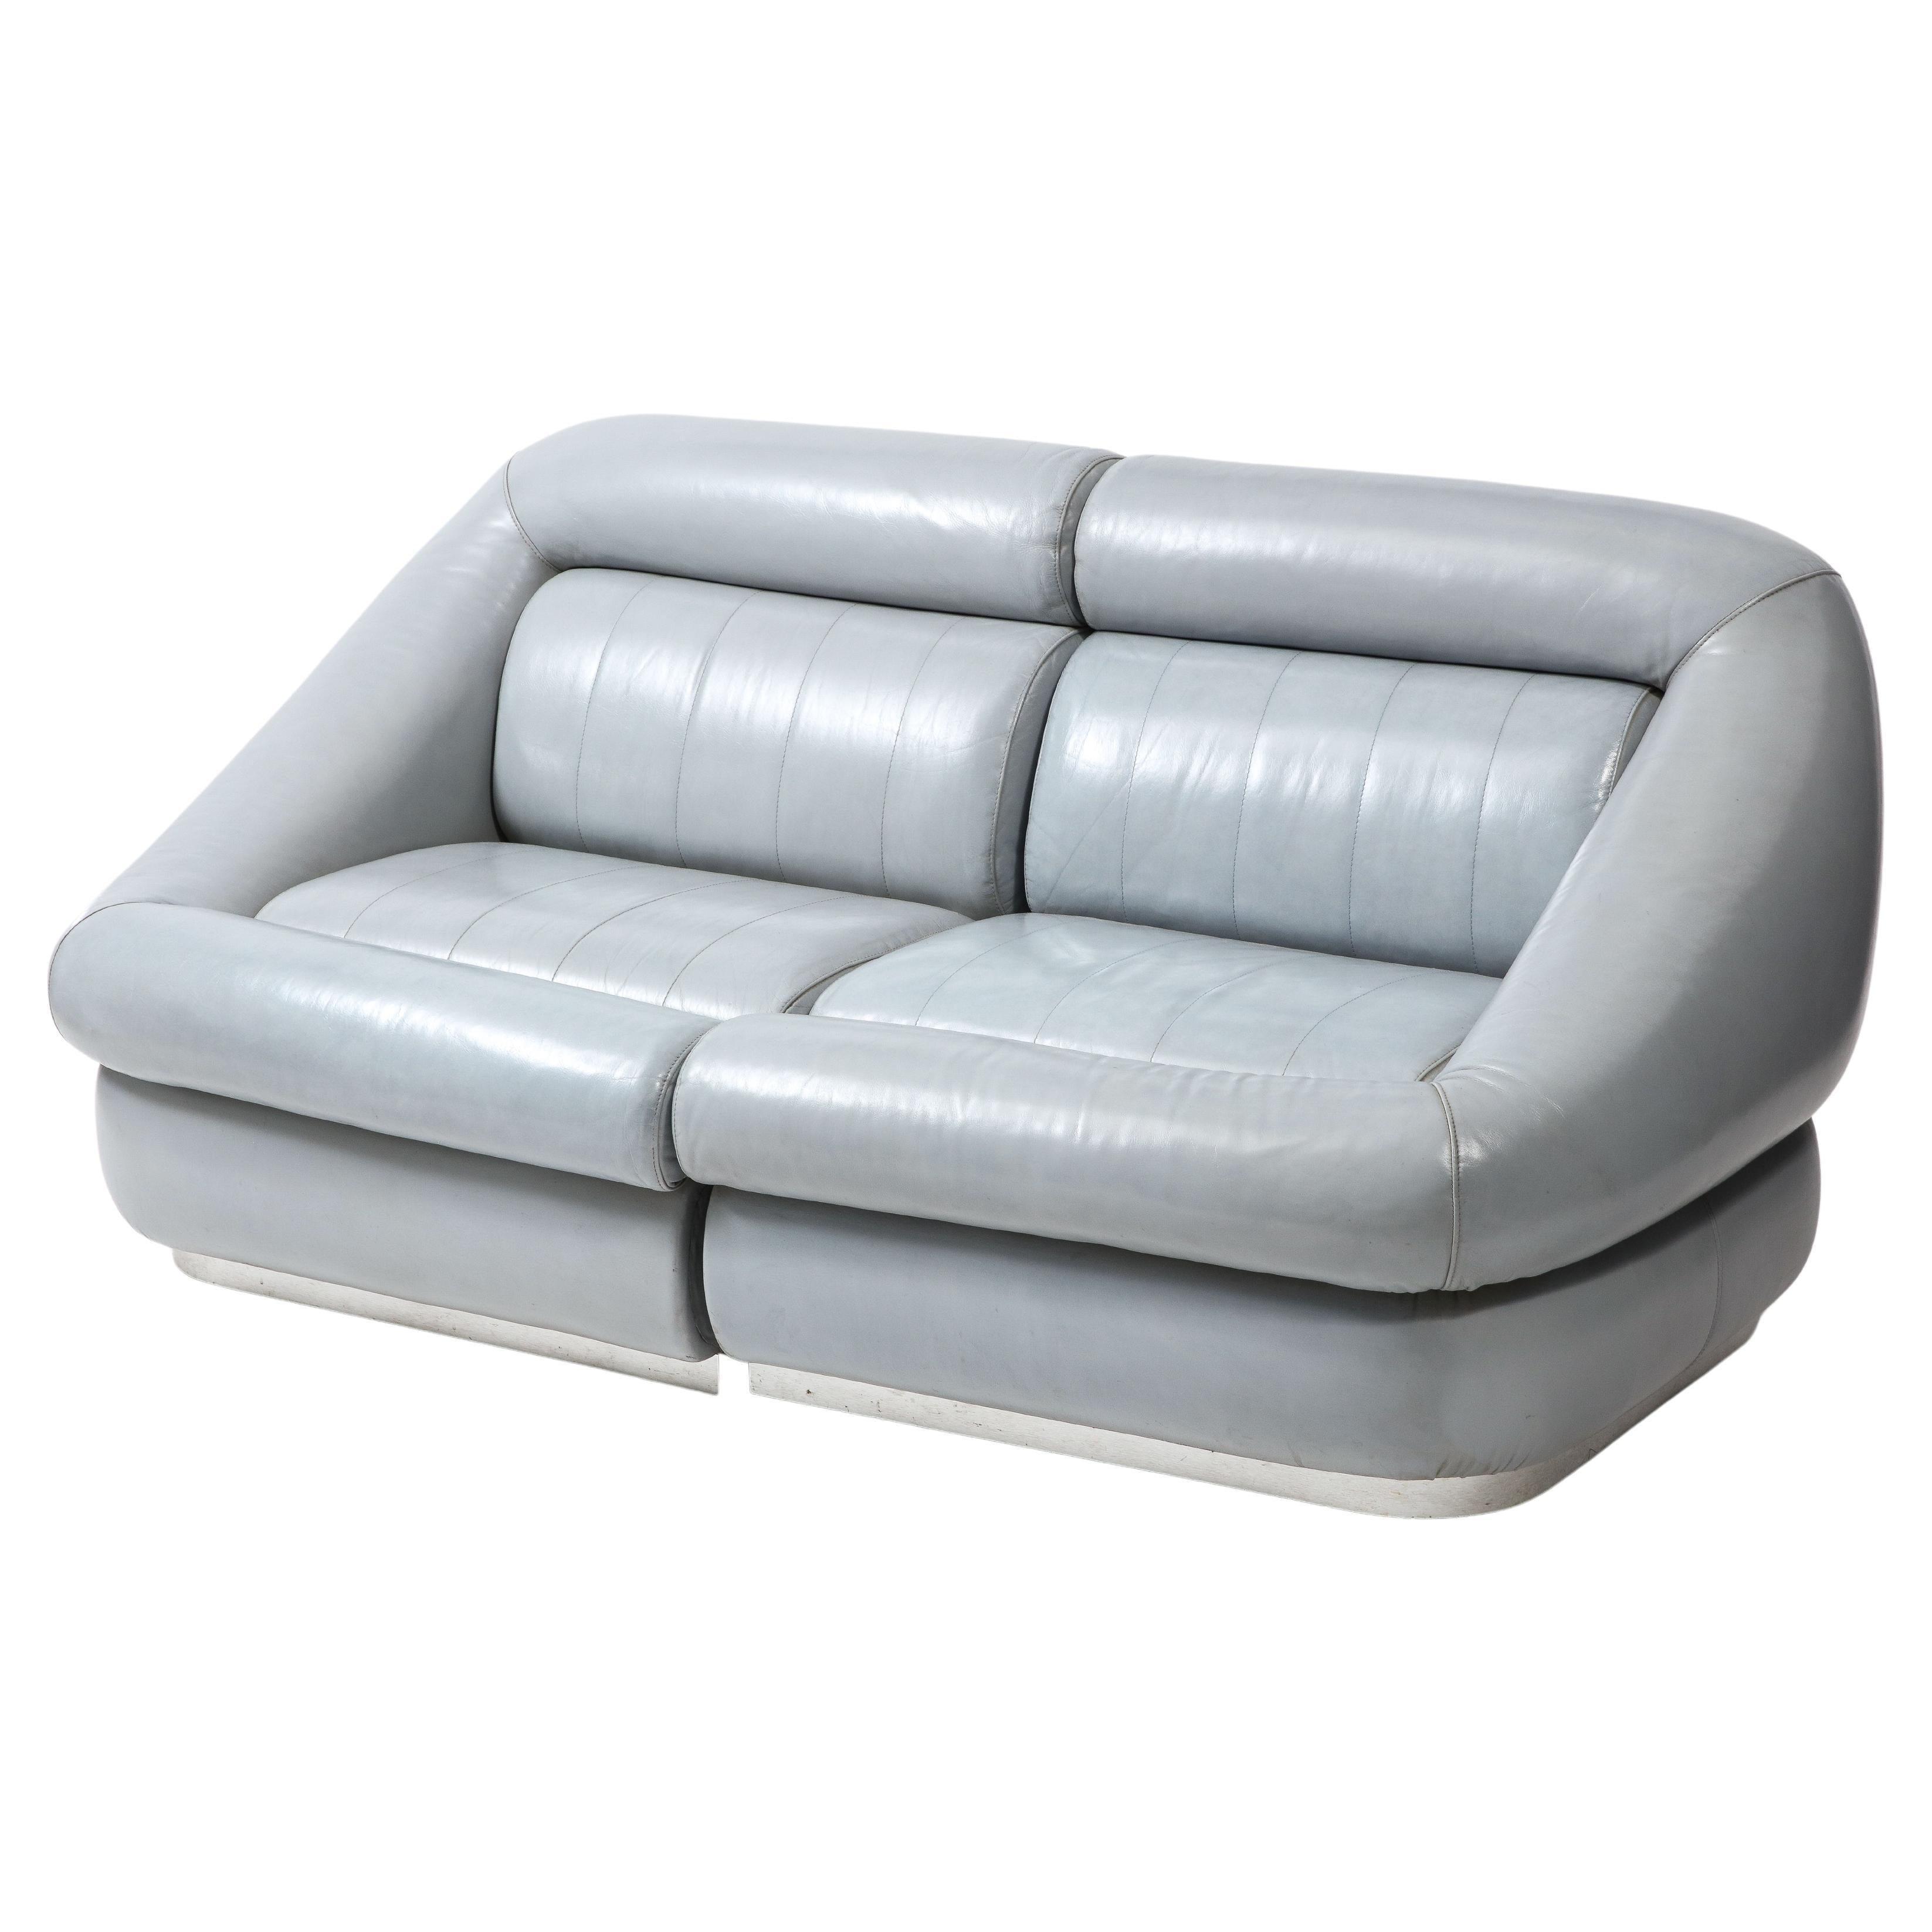 Cantu Grey Leather Settee, Italy 1970's For Sale